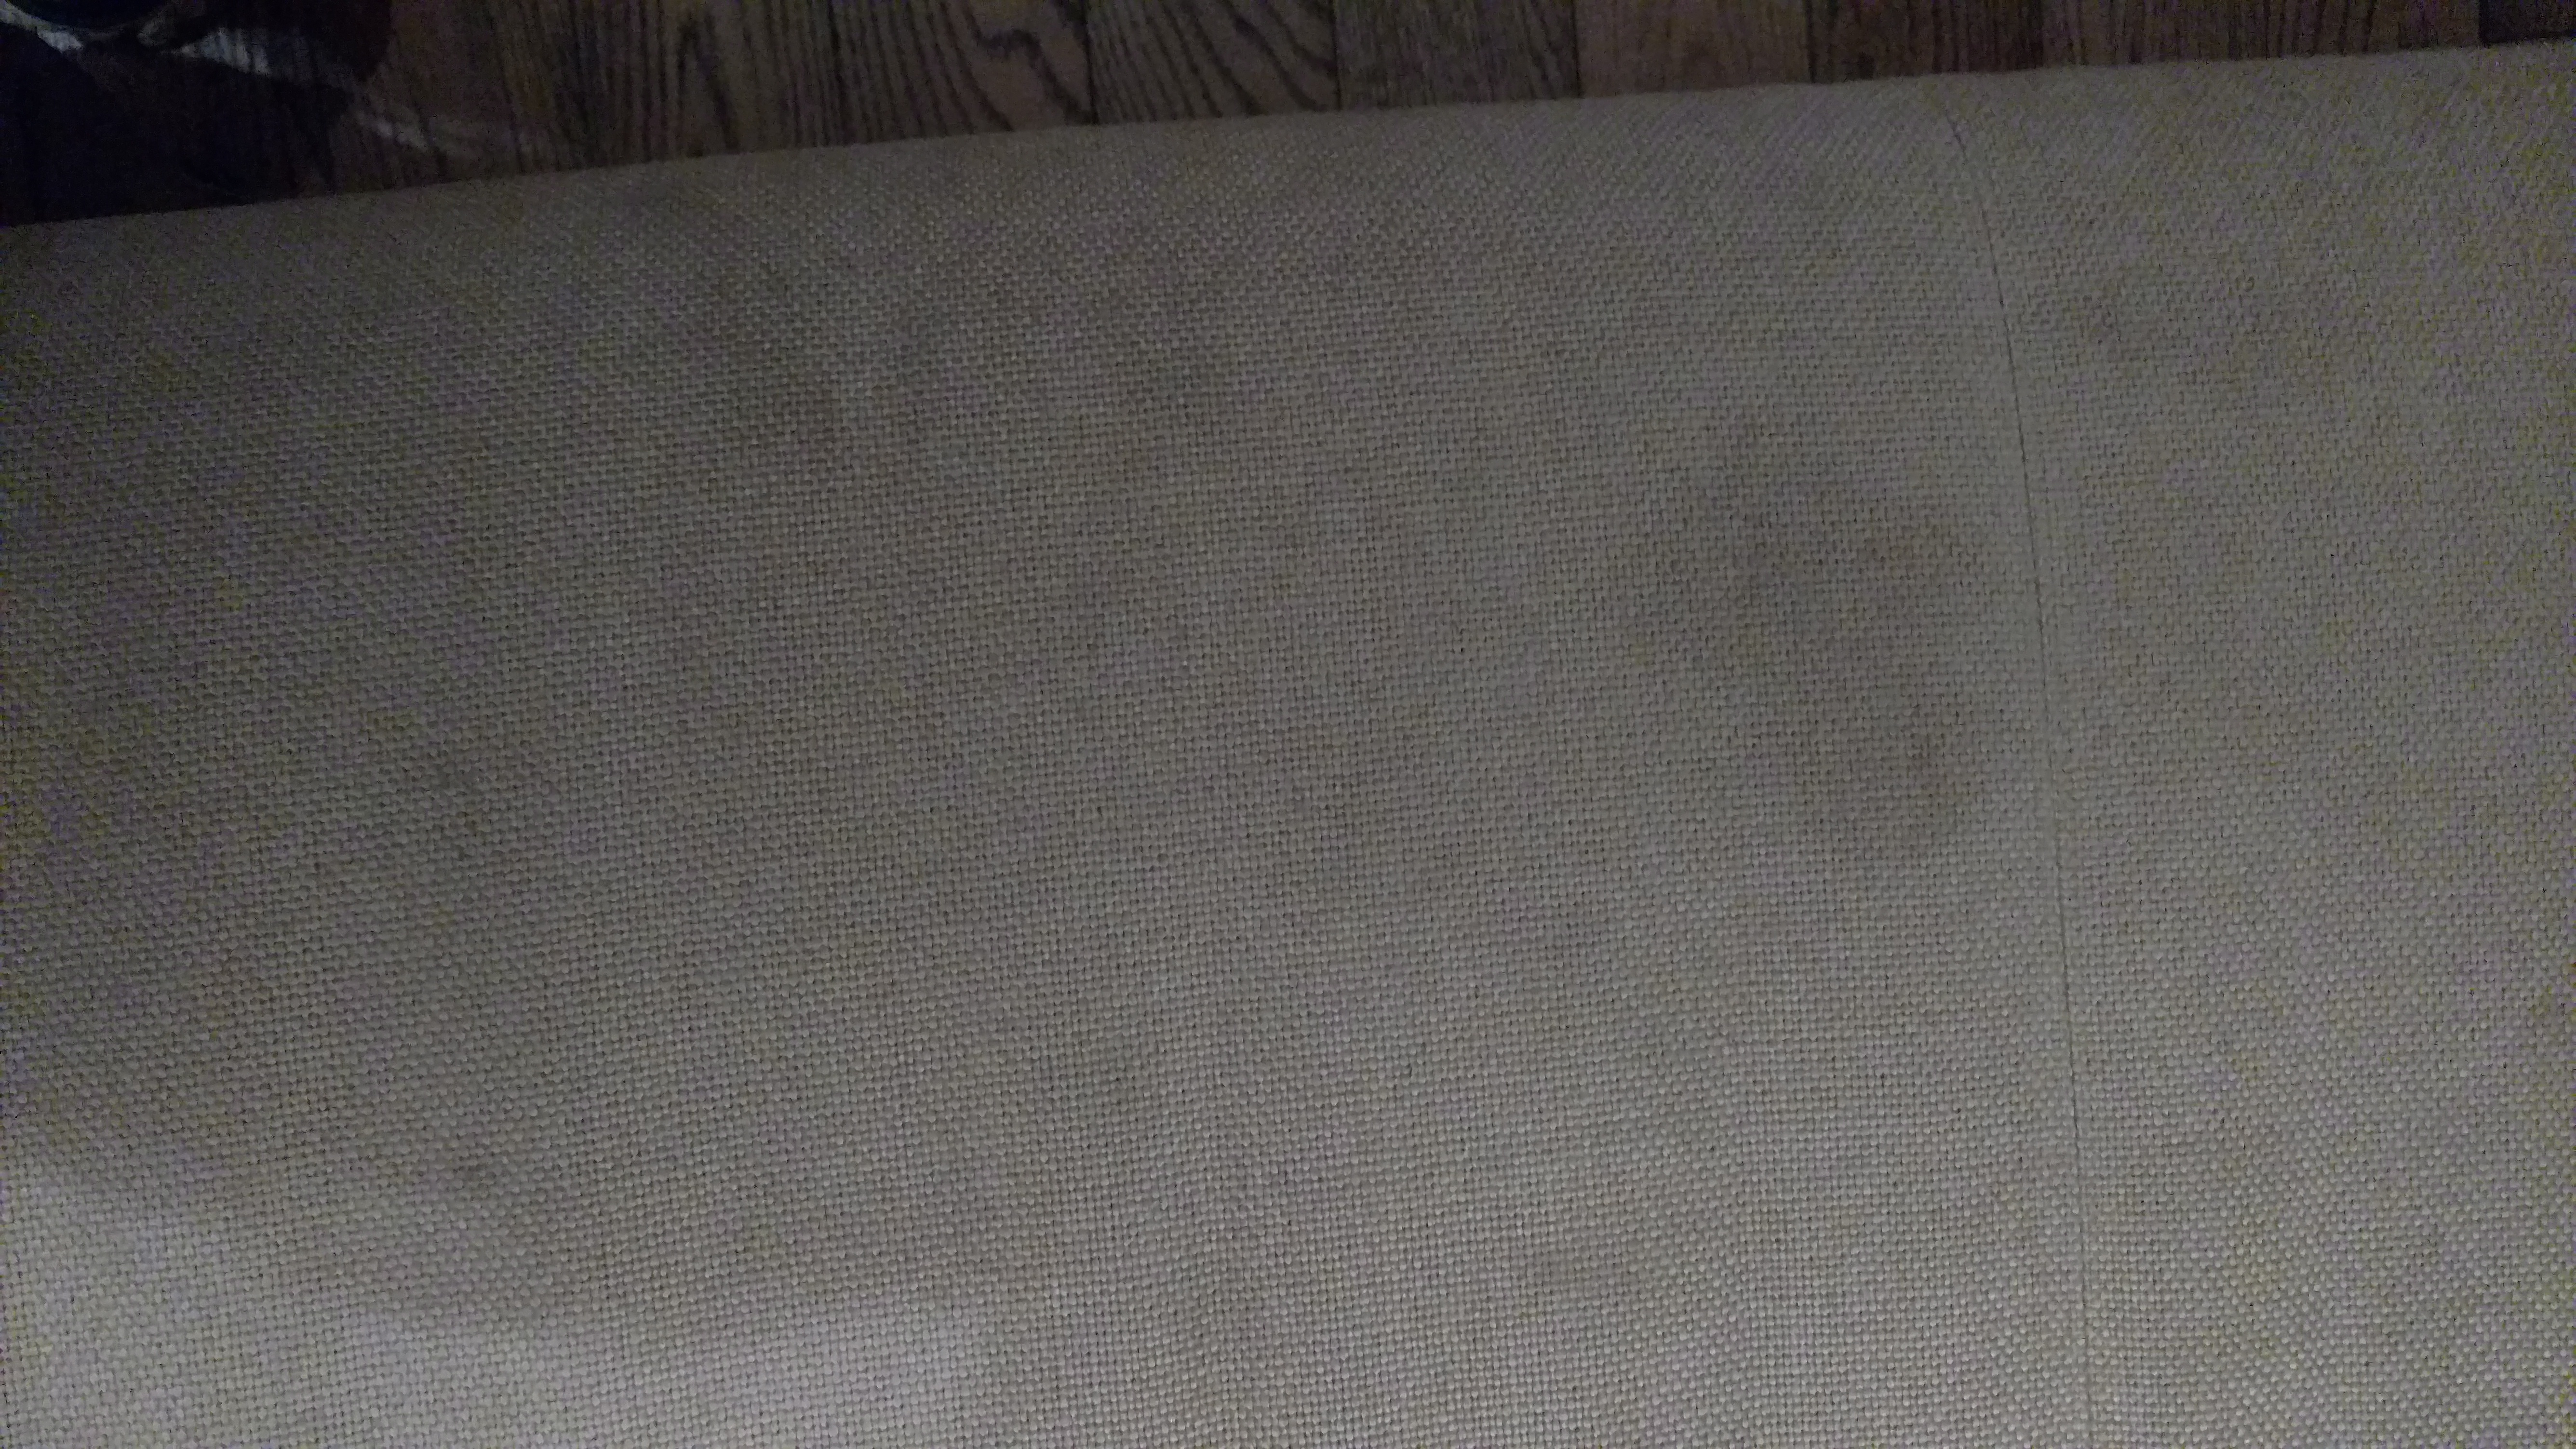 a white fabric on a wooden floor